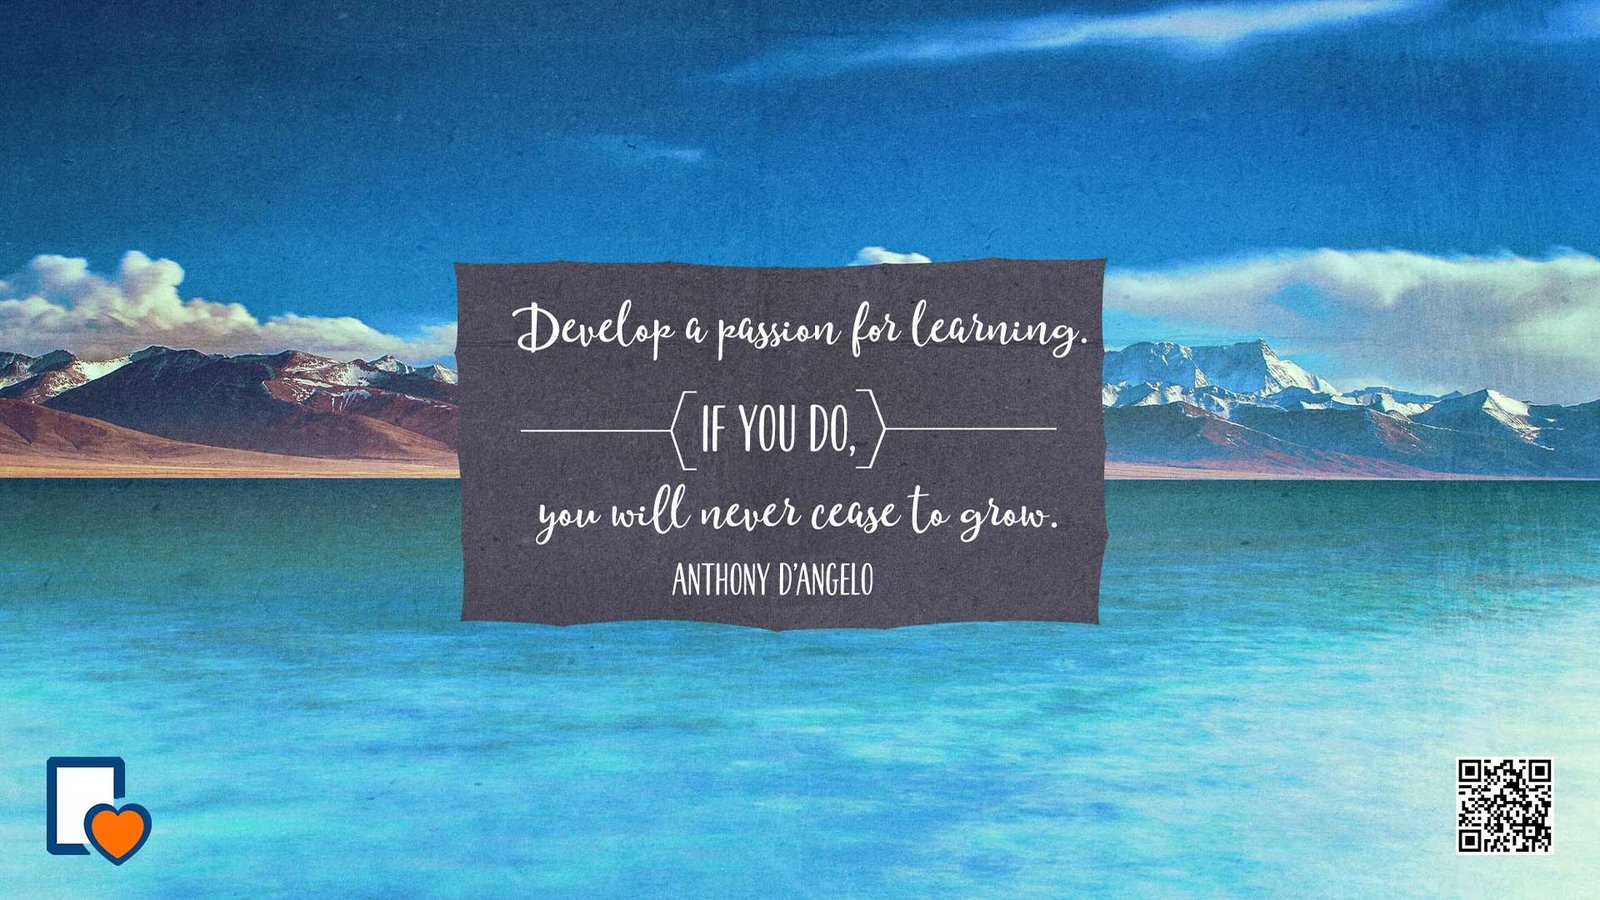 Develop a passion for learning. If you do; you will never cease to grow. -Anthony D'Angelo